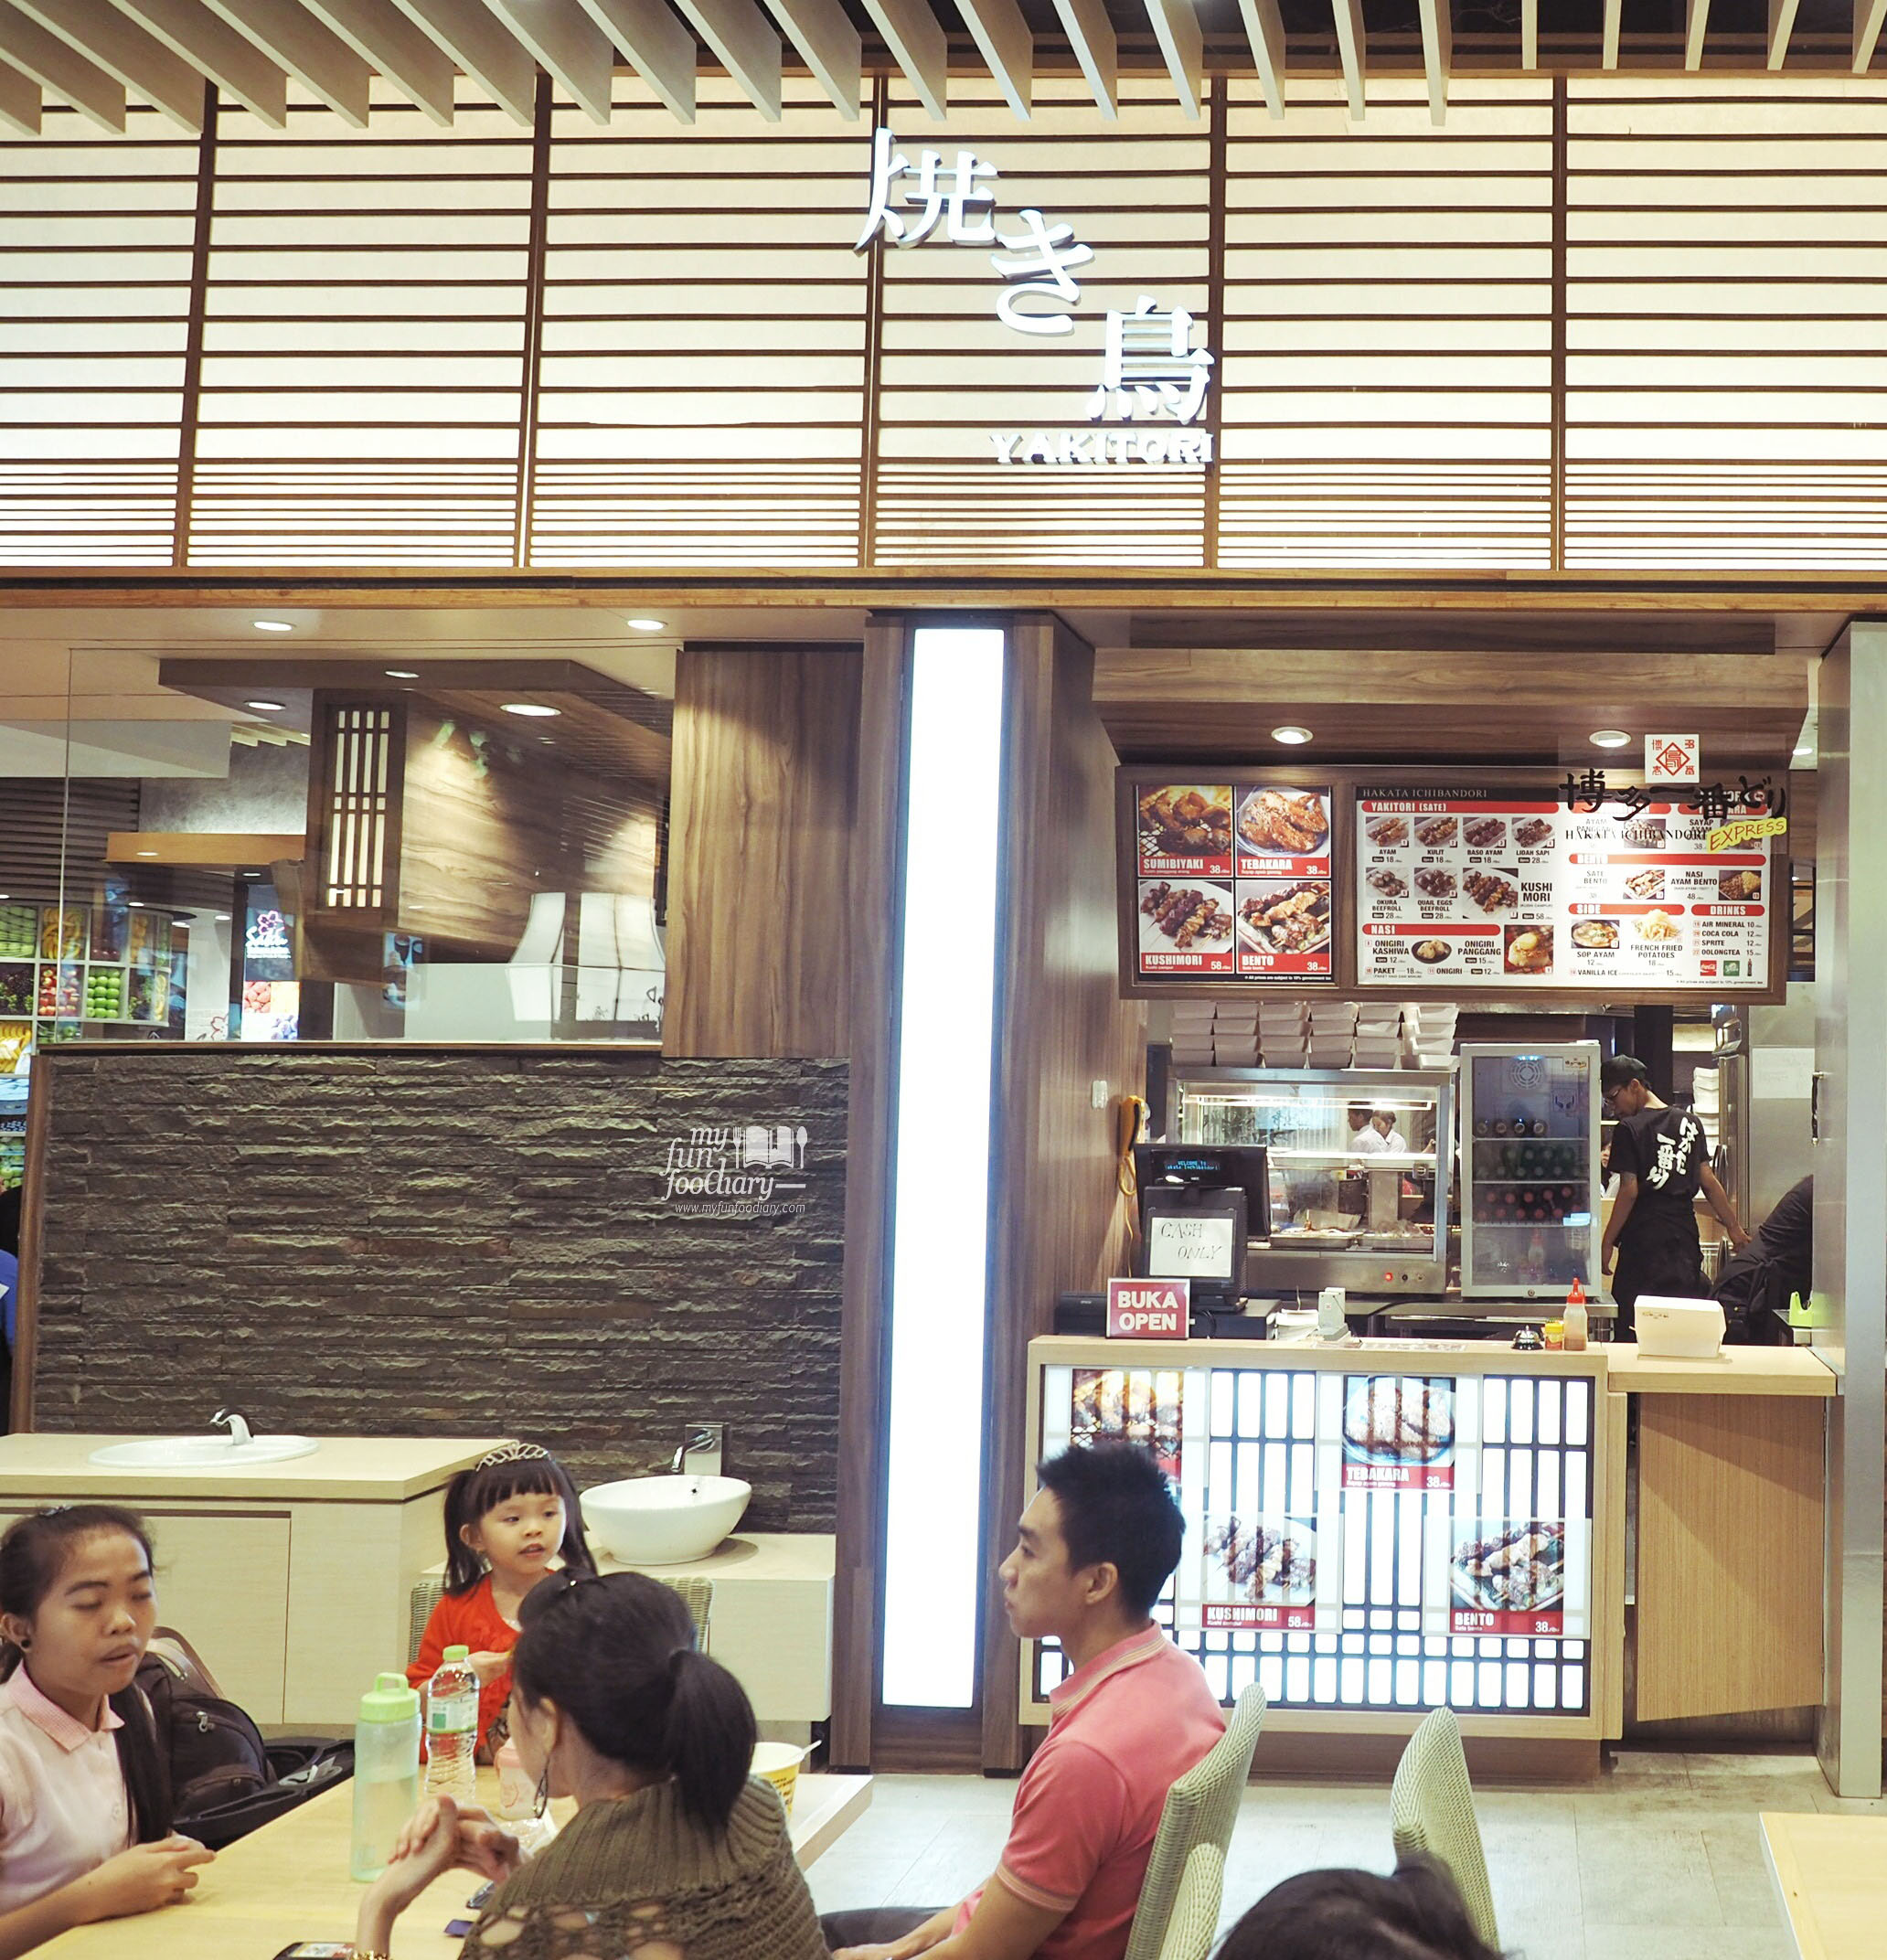 Yakitori Counter at The Food Culture AEON Mall by Myfunfoodiary